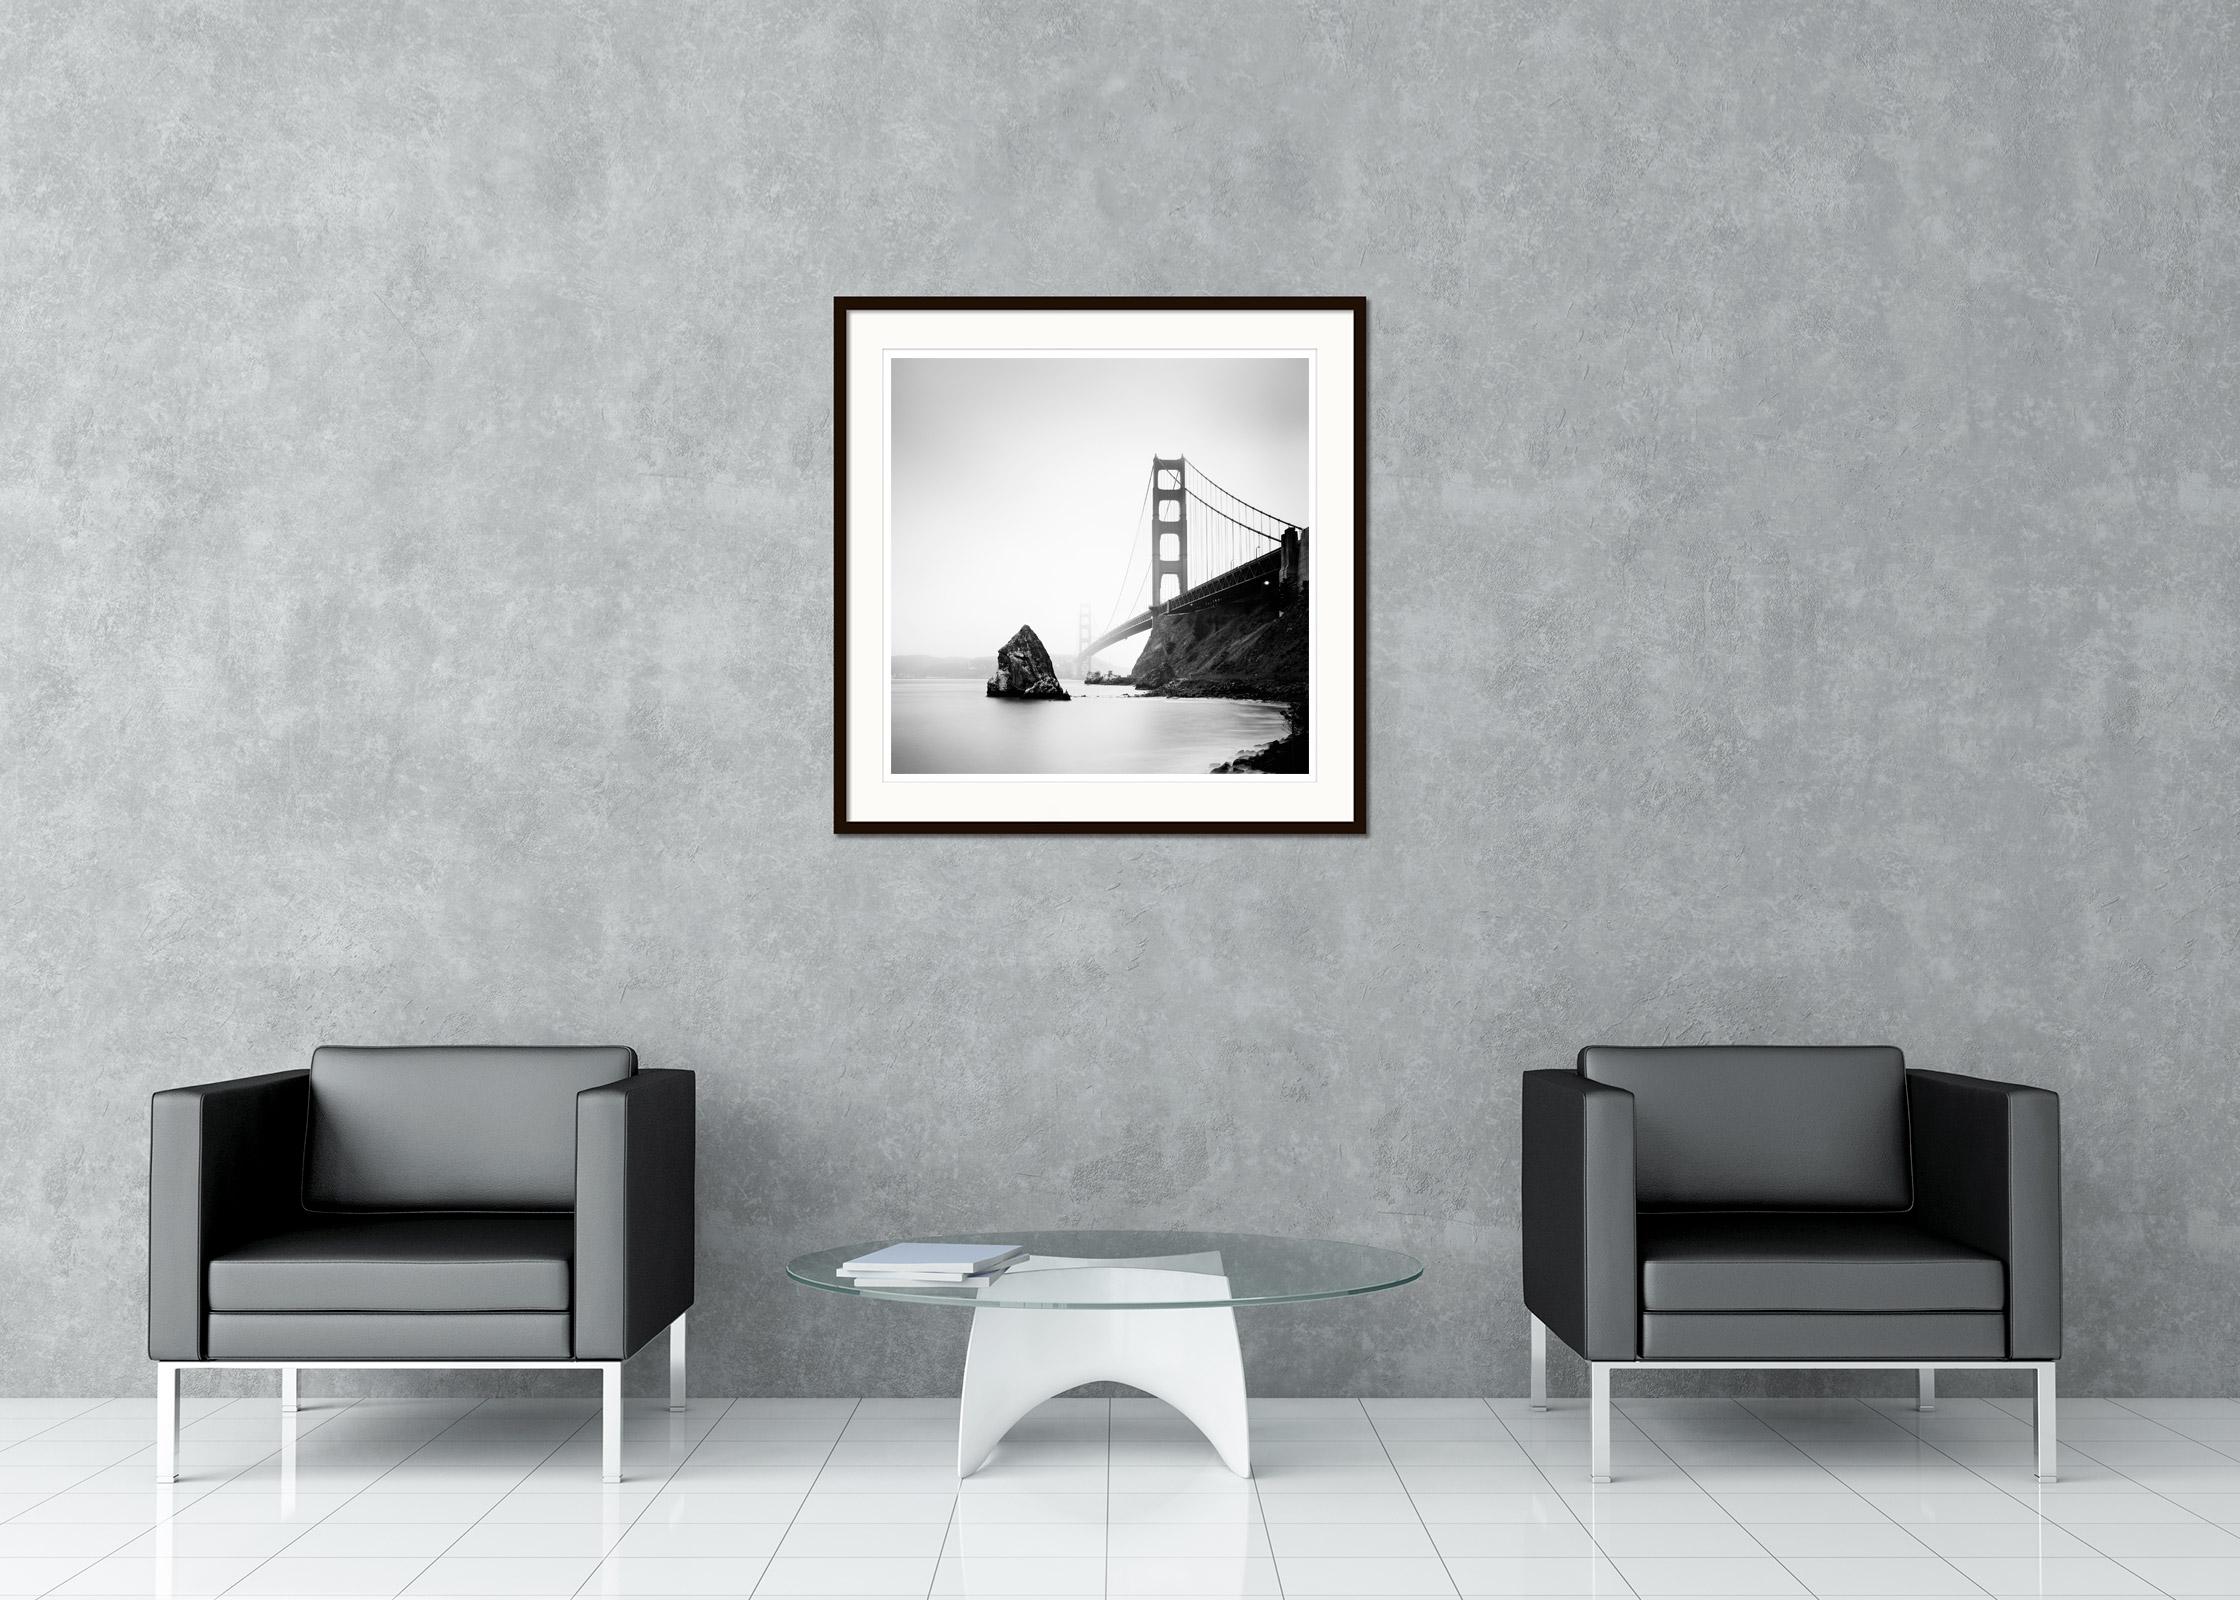 Black and White Fine Art cityscape - landscape photography. Archival pigment ink print, edition of 15. Signed, titled, dated and numbered by artist. Certificate of authenticity included. Printed with 4cm white border. International award winner